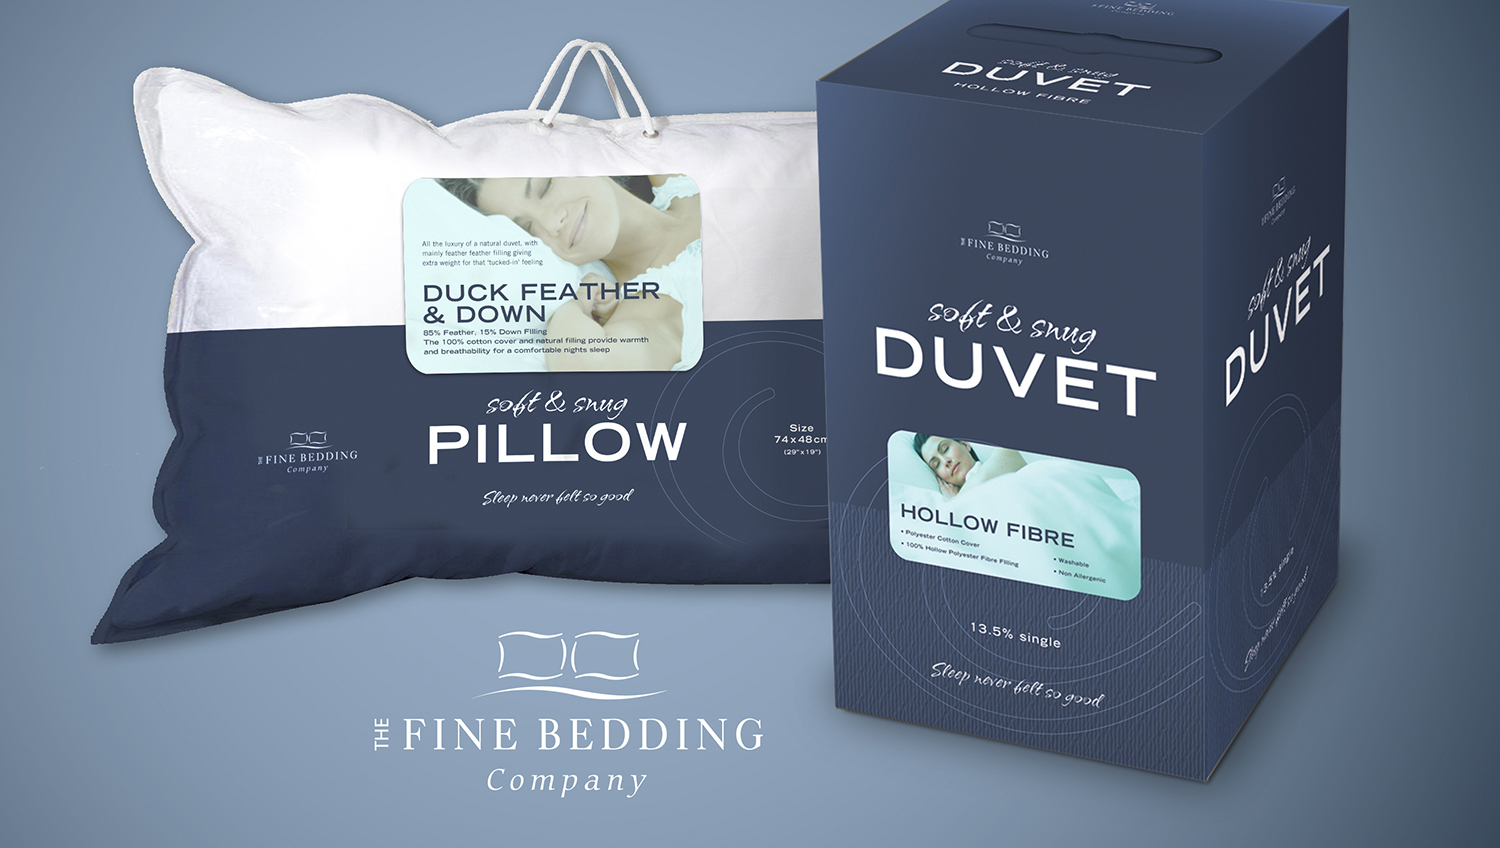 The Fine Bedding Company Pillow & Duvet Packaging - Main Image